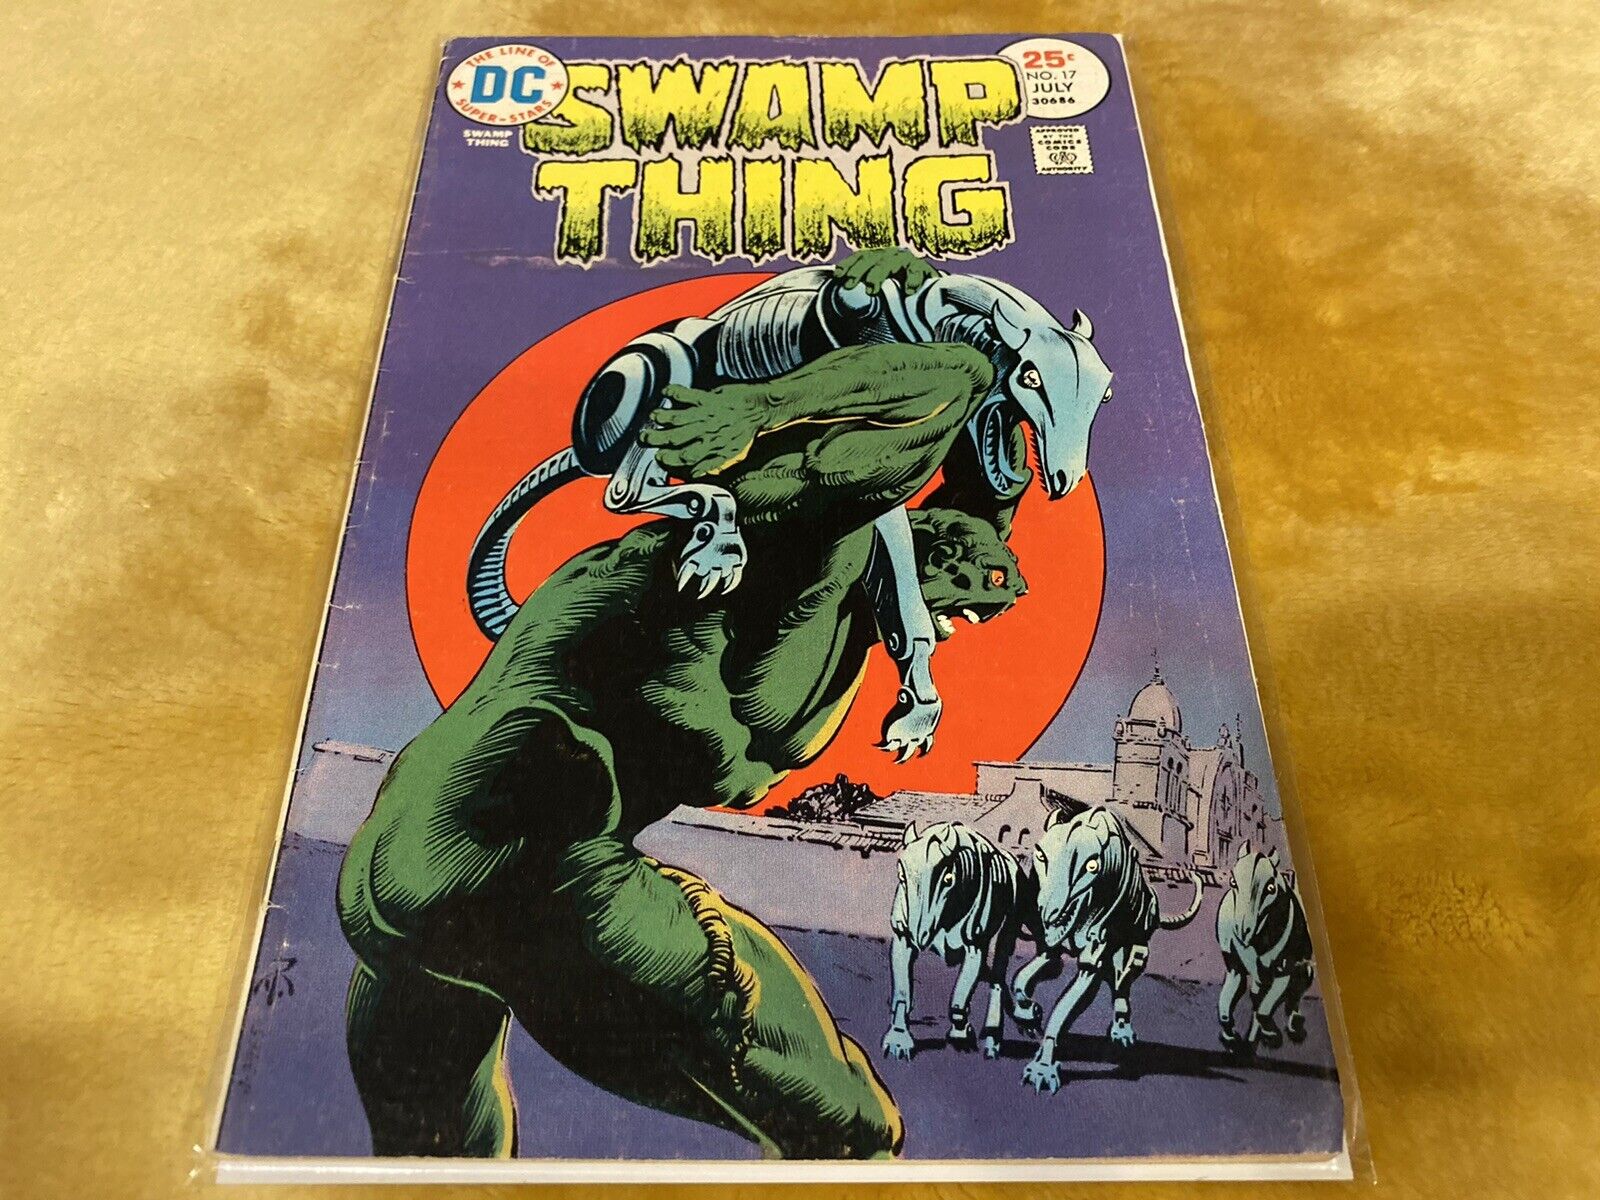 RARE Vintage 1975 DC Comics Swamp Thing Vol. 1 #17 Iconic Horror Battle Cover